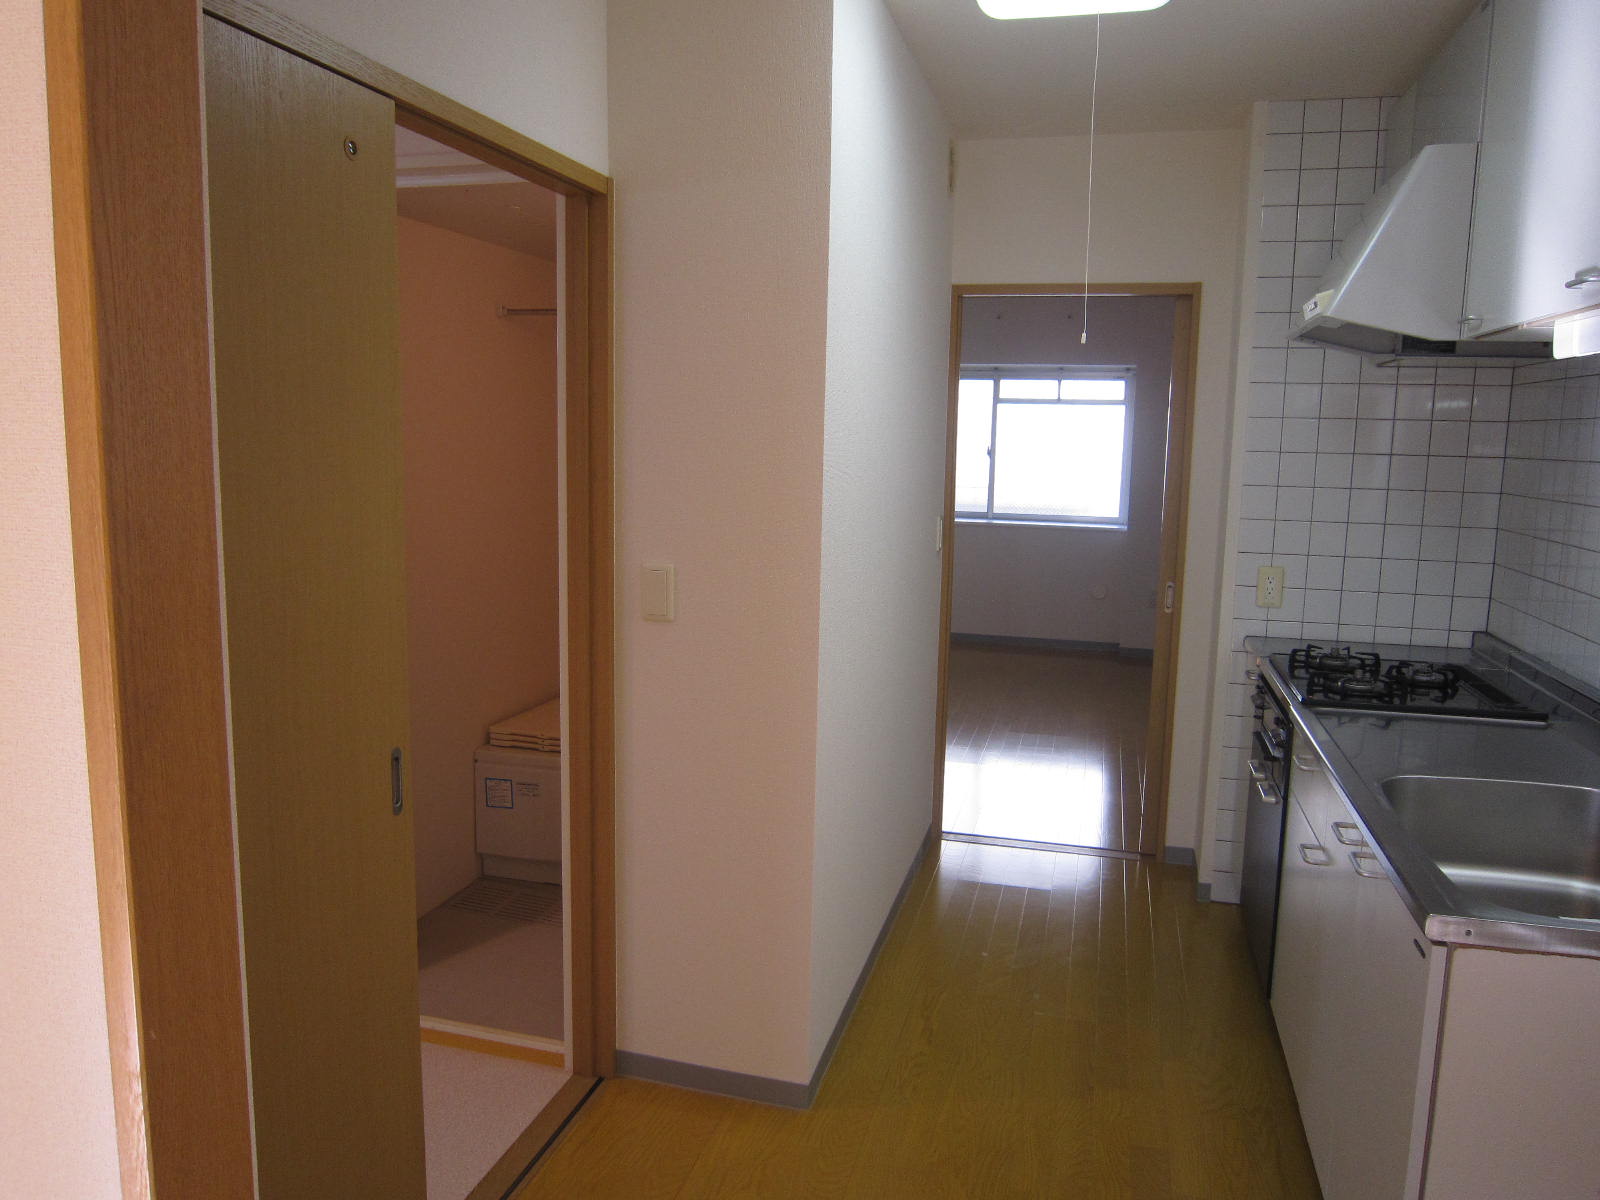 Bath. Bathroom from the kitchen ・ Go to Western-style